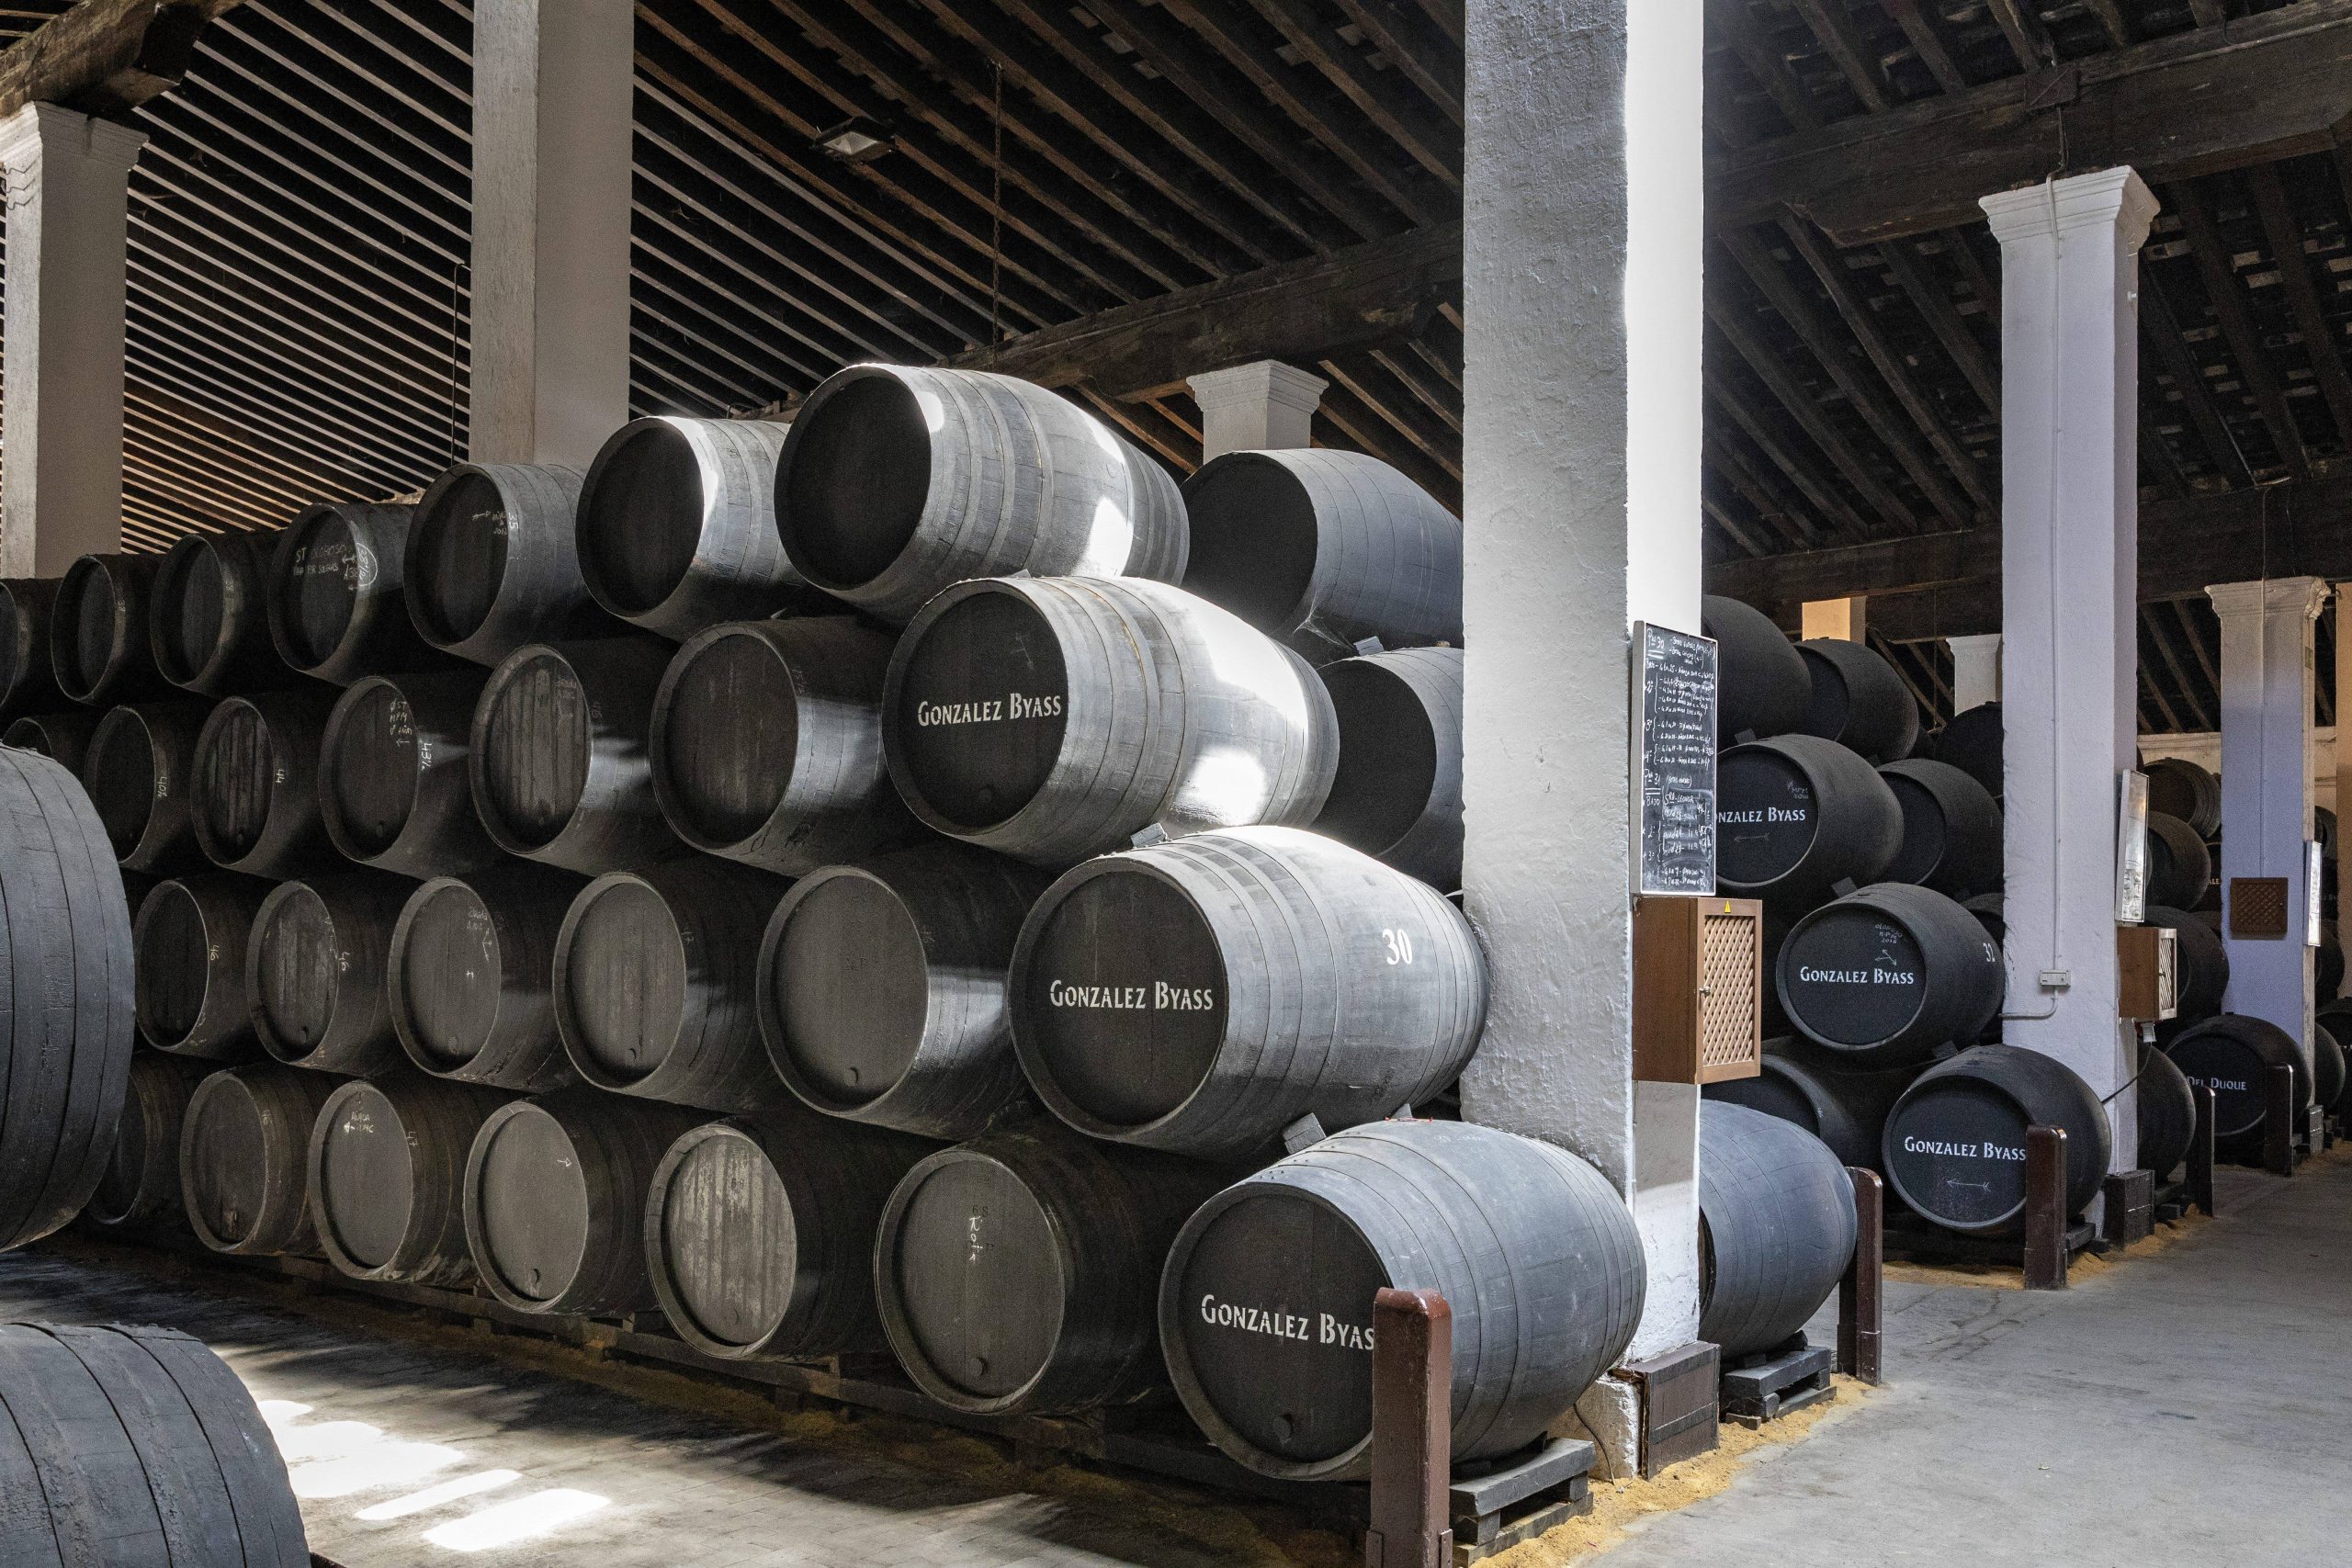 Famous wine and sherry producer known for Tio Pepe is voted the decade's best winery in Spain